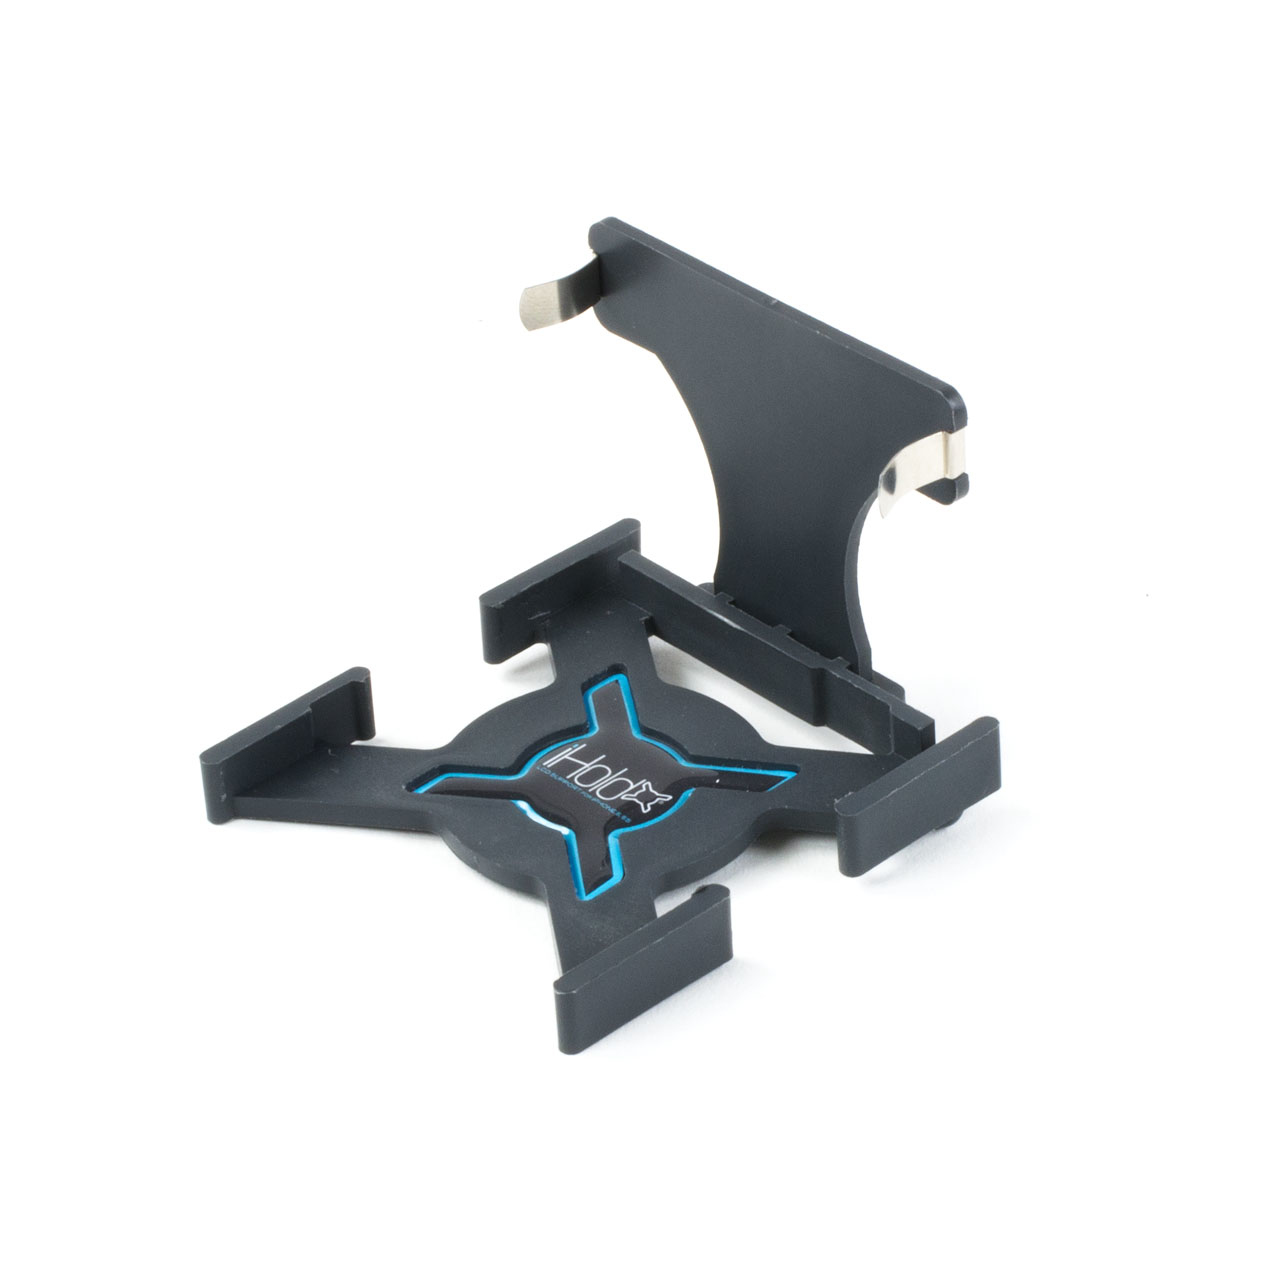 EU145296-2 IFIXIT Dotterpod iHold Repair Holder for iPhone 6  6s